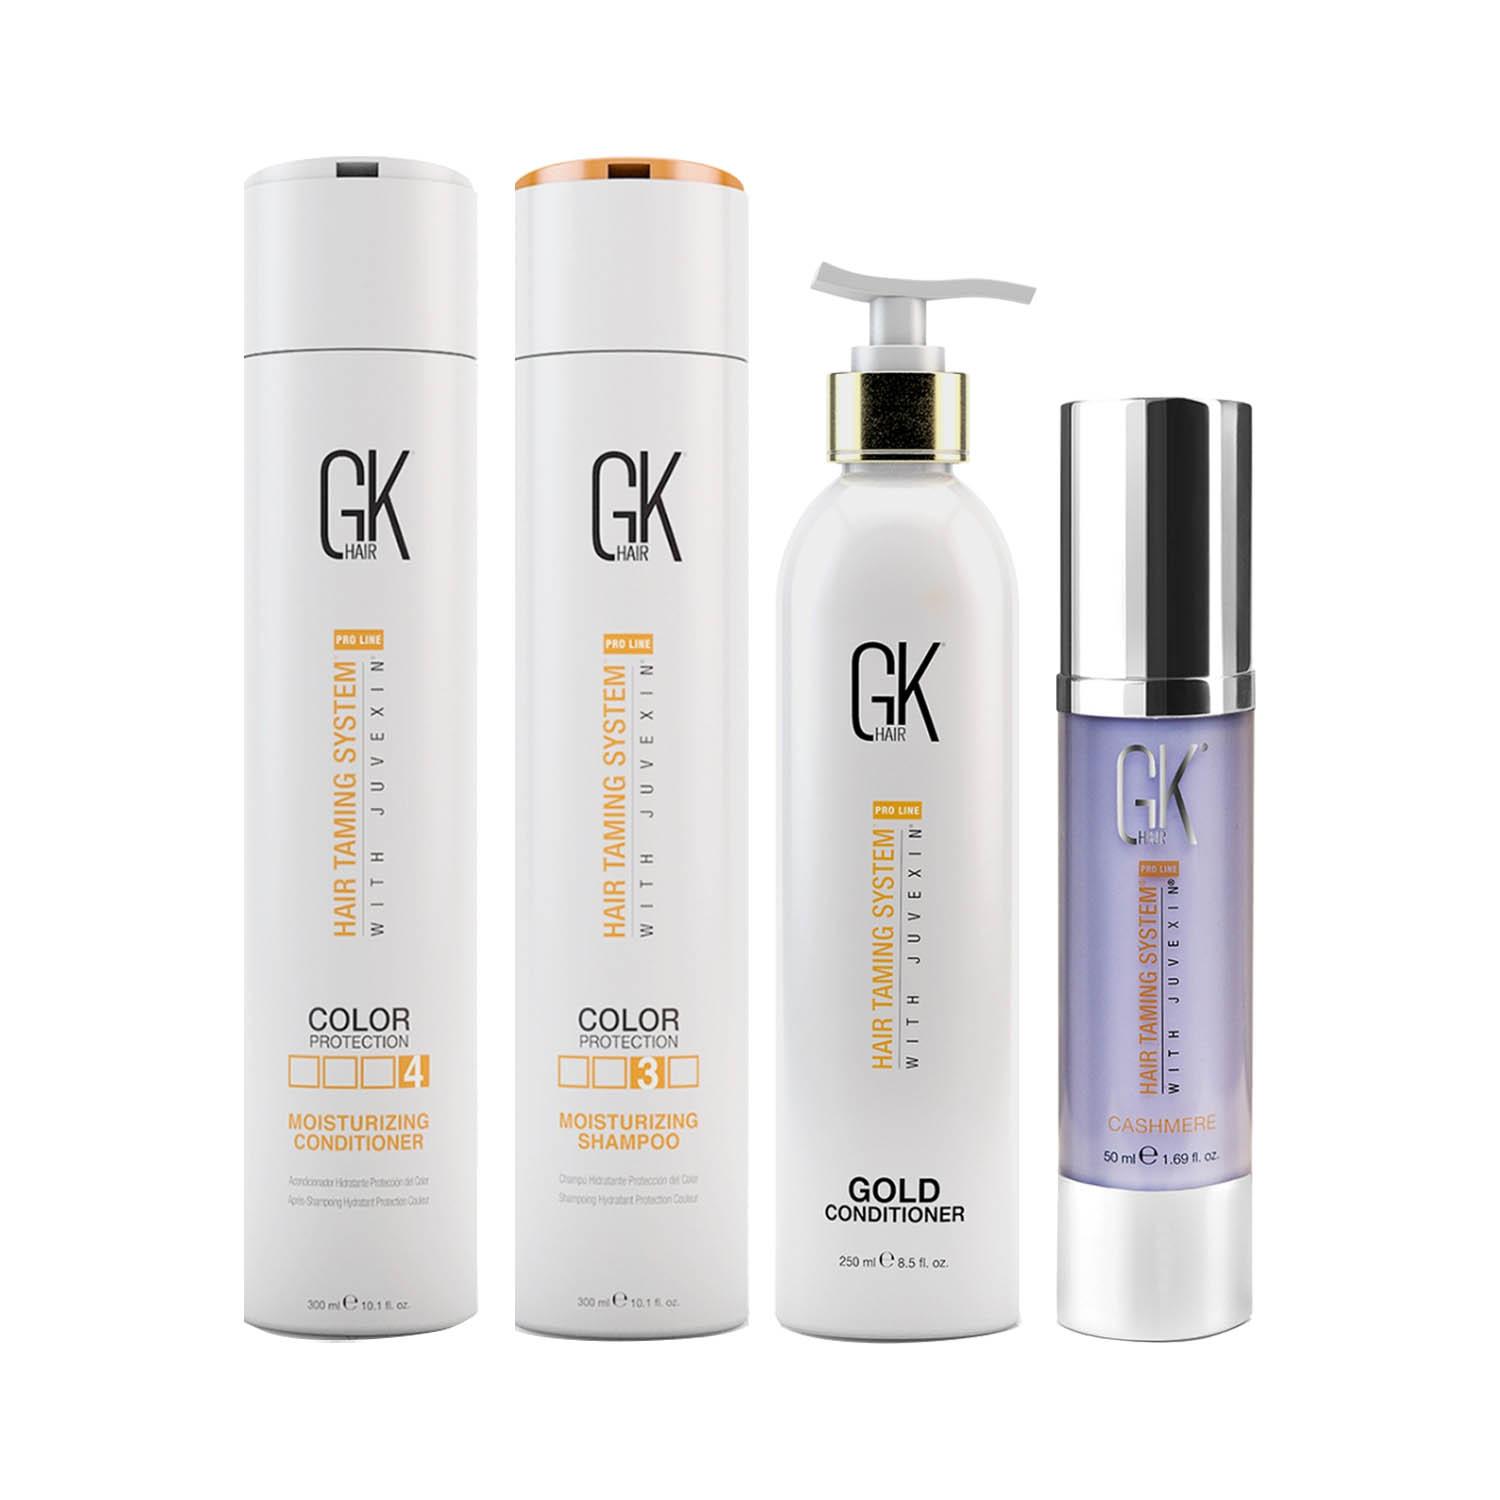 GK Hair | GK Hair Moisturizing Shampoo and Conditioner 300ml with Cashmere 50ml and Gold Conditioner 250ml